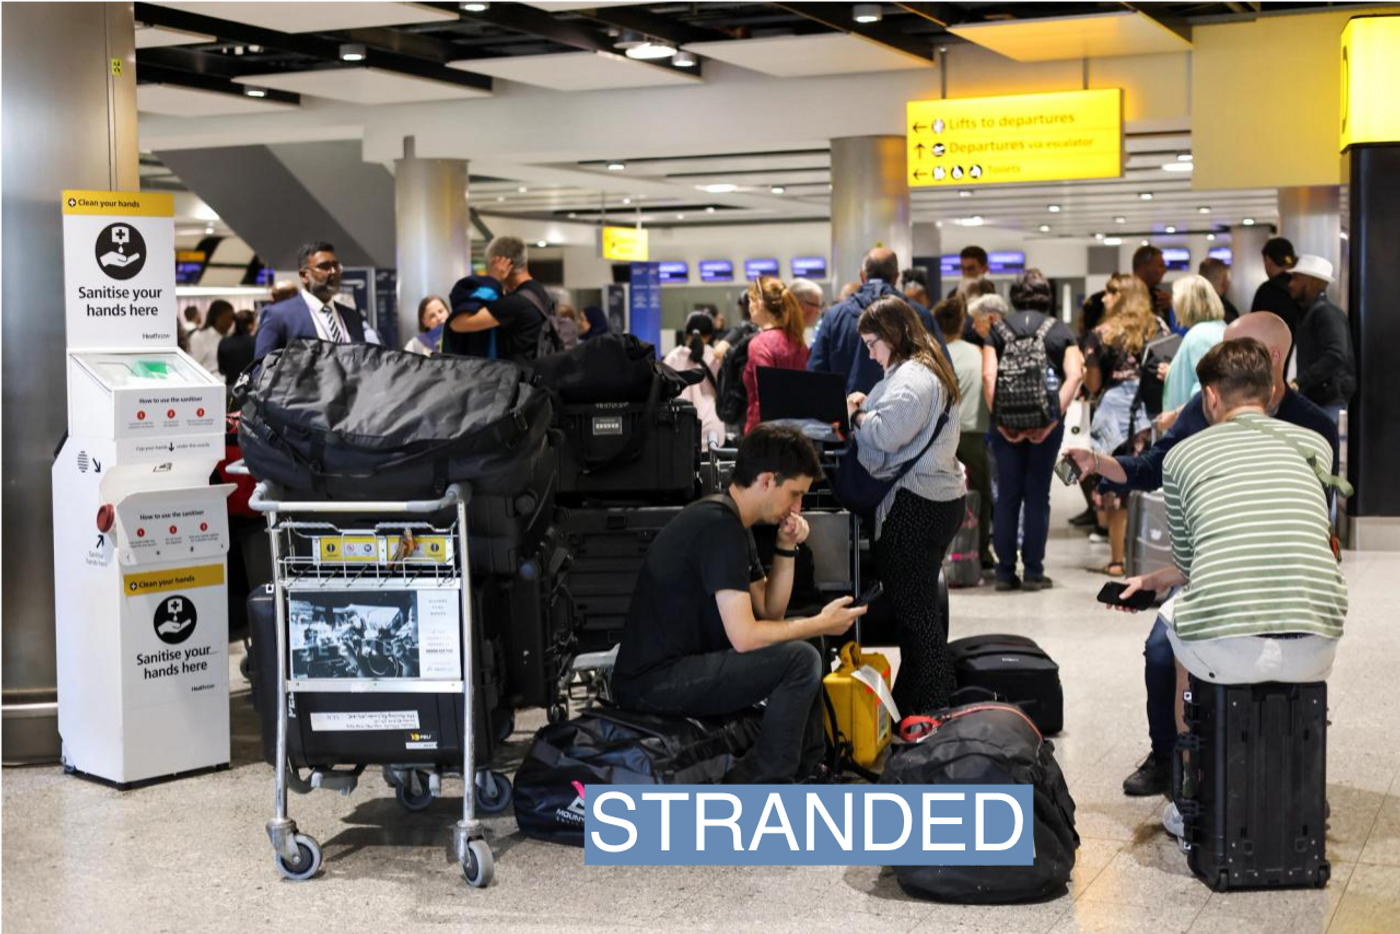 Travellers wait near the British Airways check-in area at Heathrow Airport, as Britain's National Air Traffic Service (NATS) restricts UK air traffic due to a technical issue causing delays, in London, Britain, August 28, 2023. REUTERS/Hollie Adams